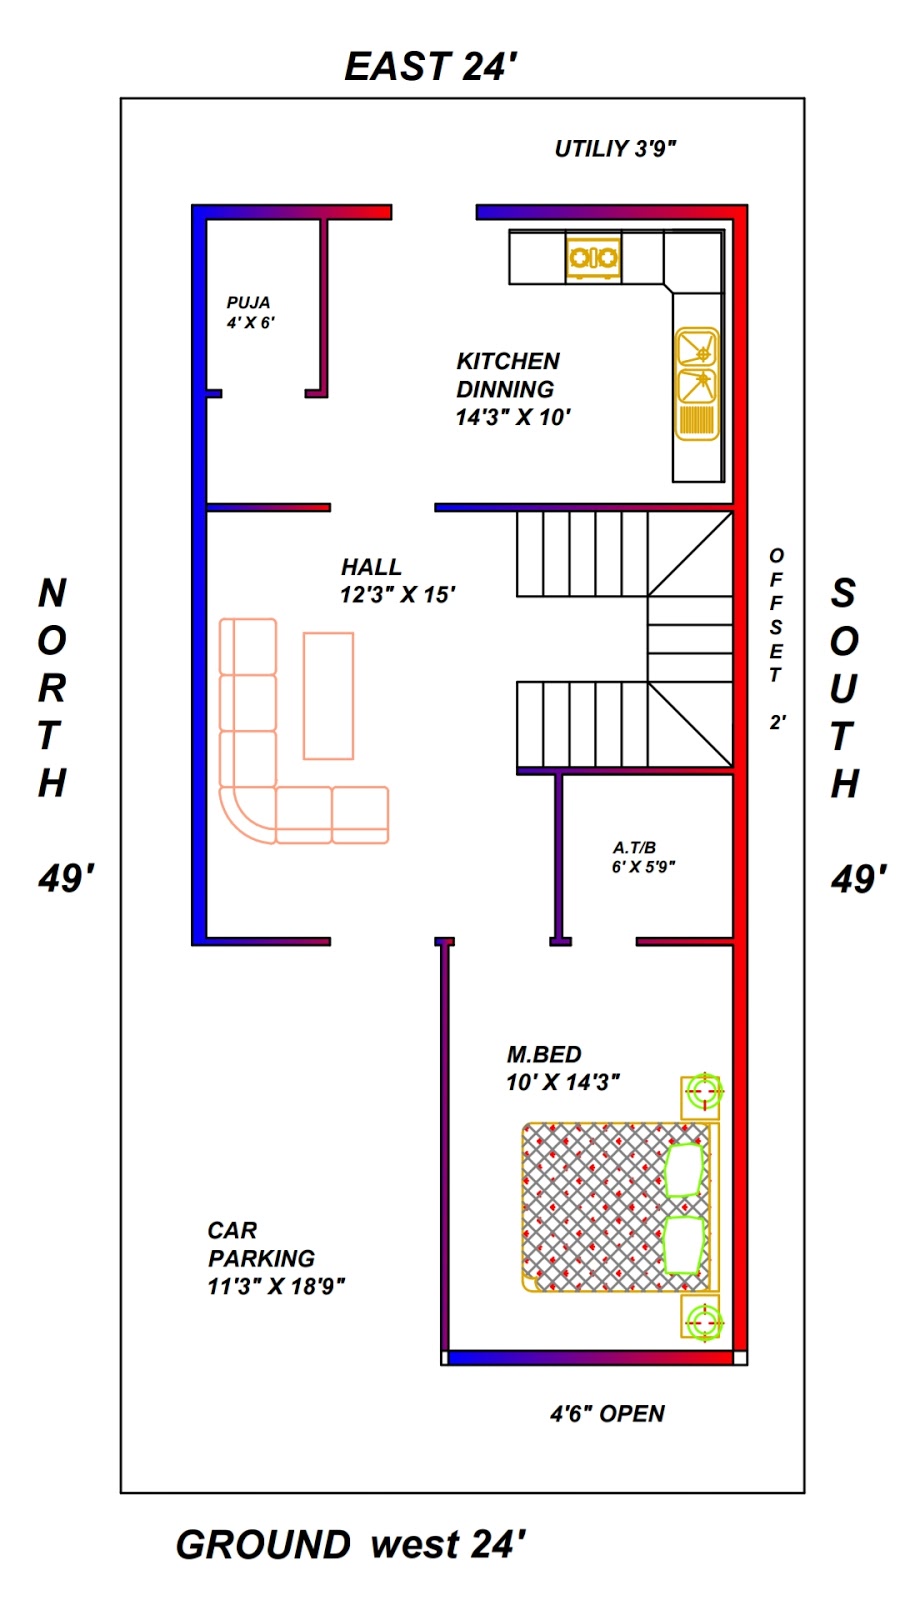 Awesome House Plans 24 X 50 West Face Duplex House Plan With 3 Bedroom Map Design